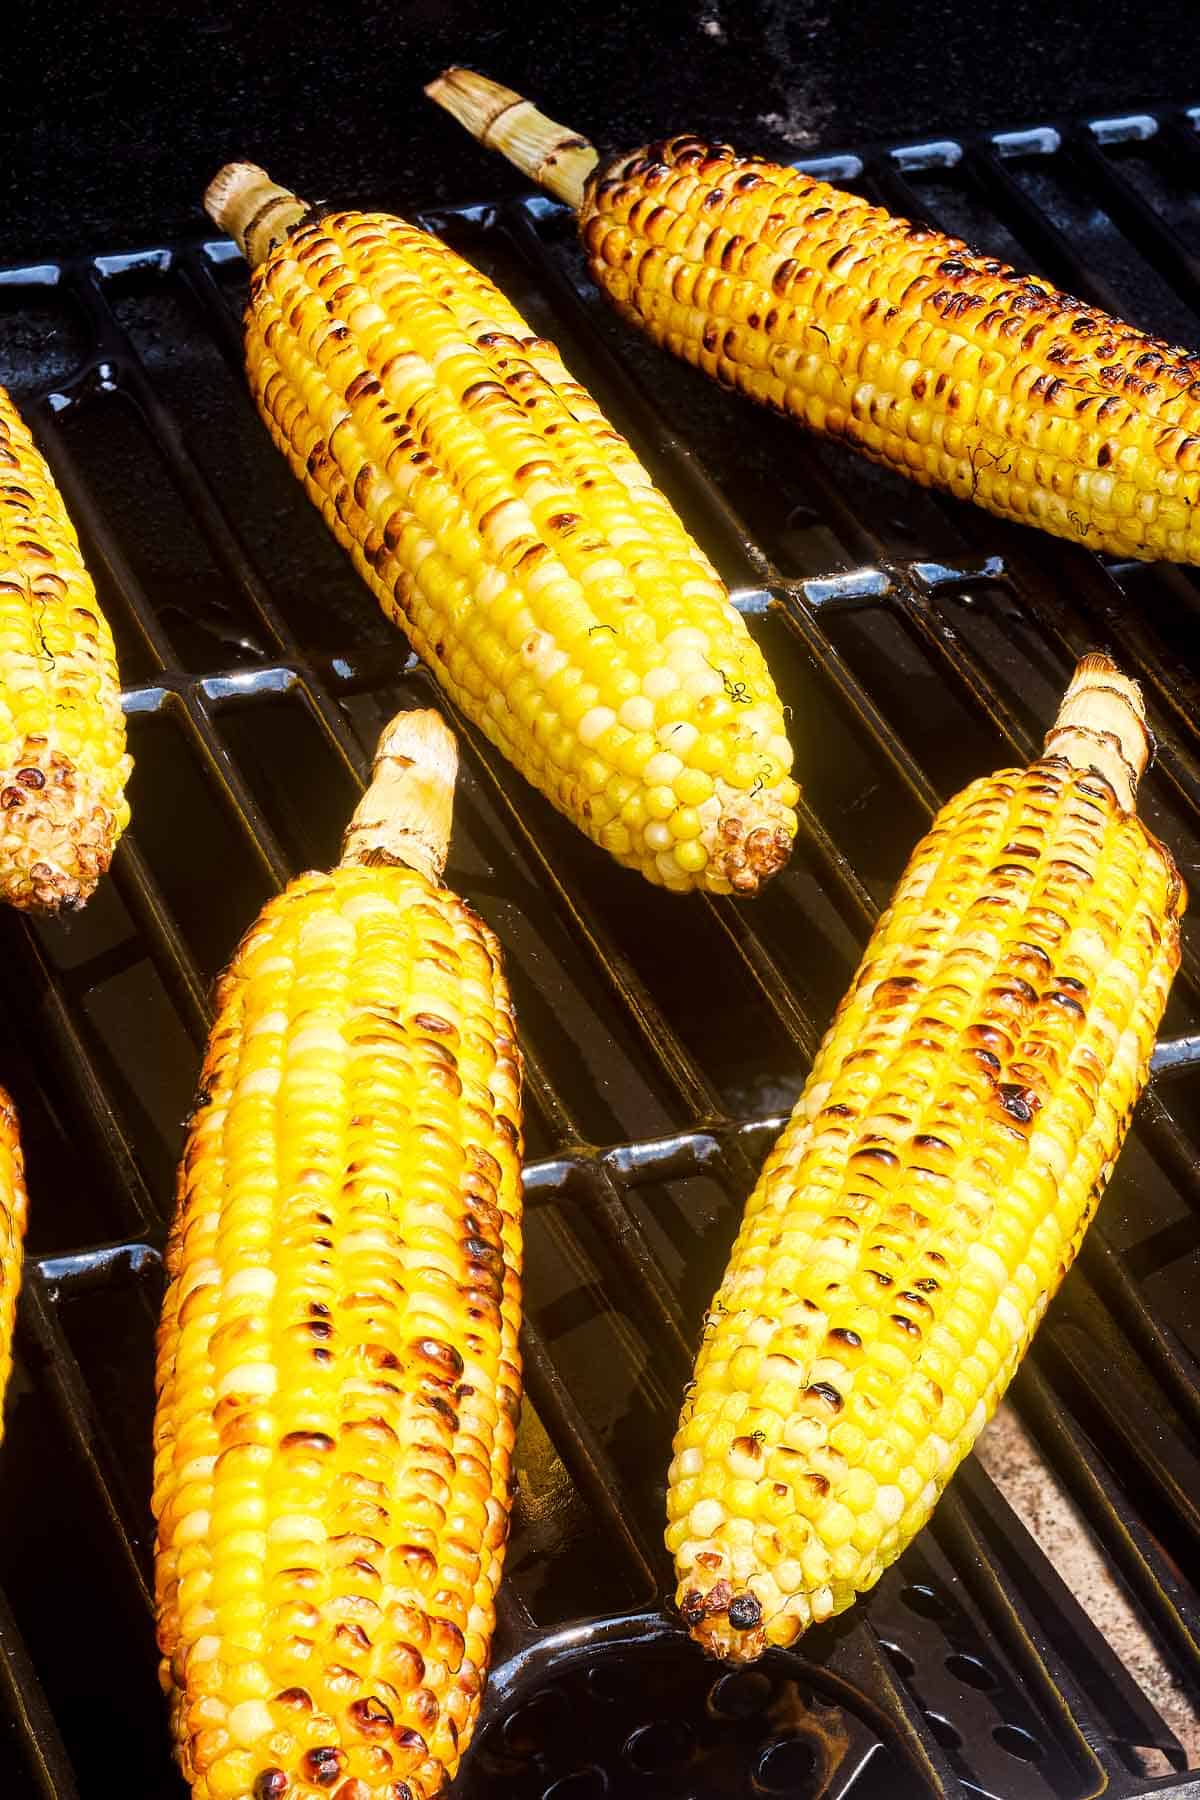 A close up of 4 corncobs being grilled on a grill.